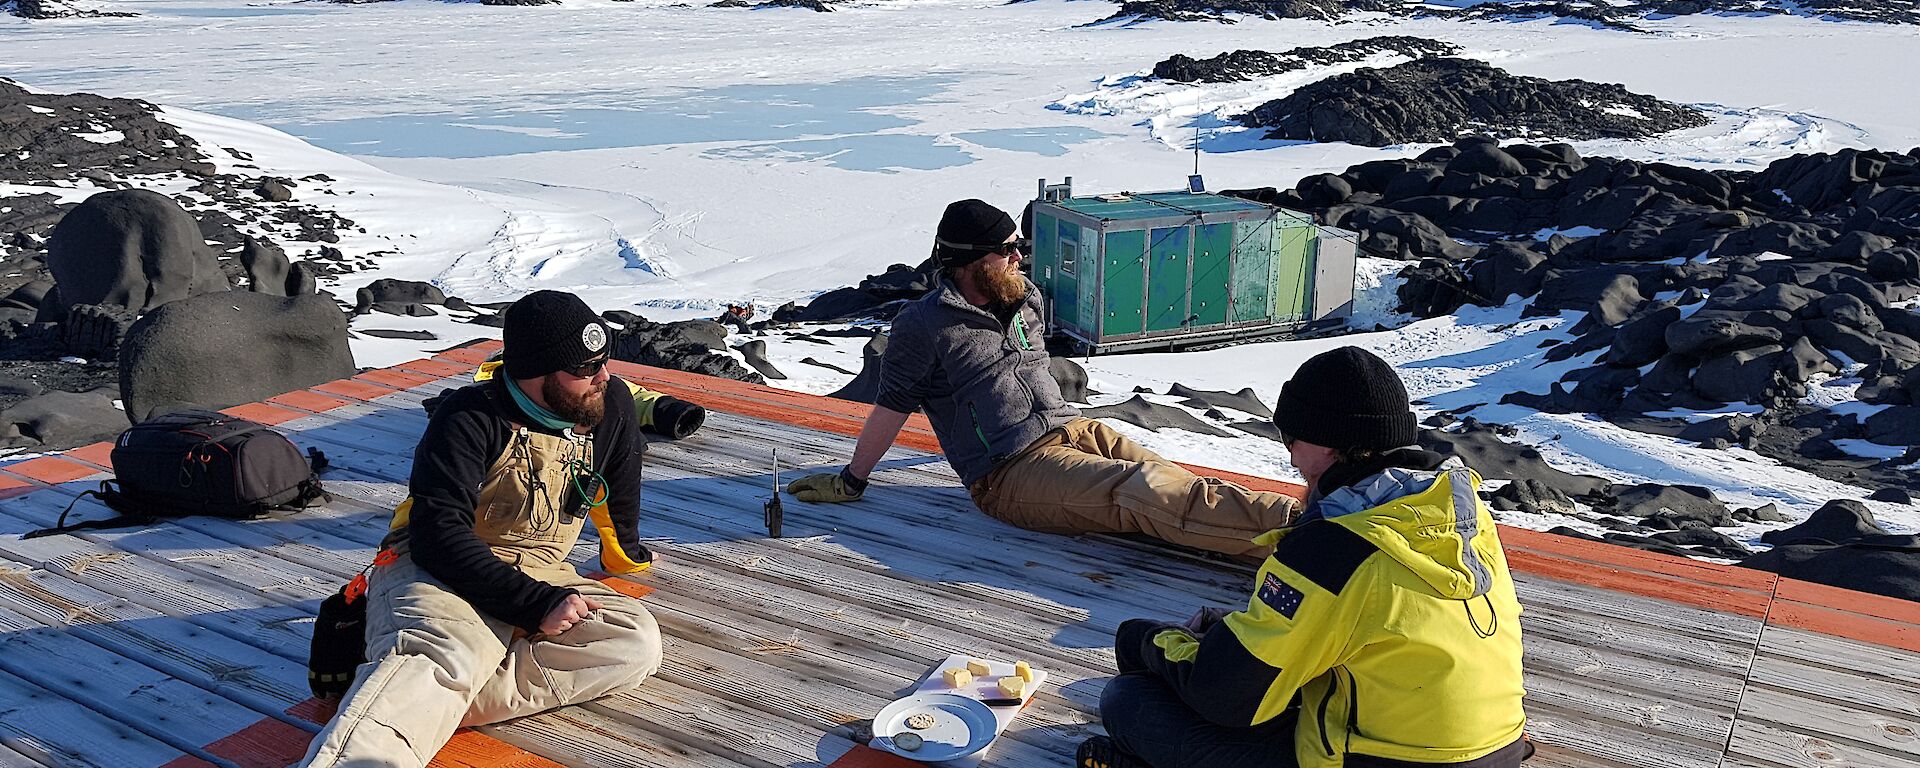 Three expeditioners sit relaxing on the wooden verandah of the hut with cheese and buscuits